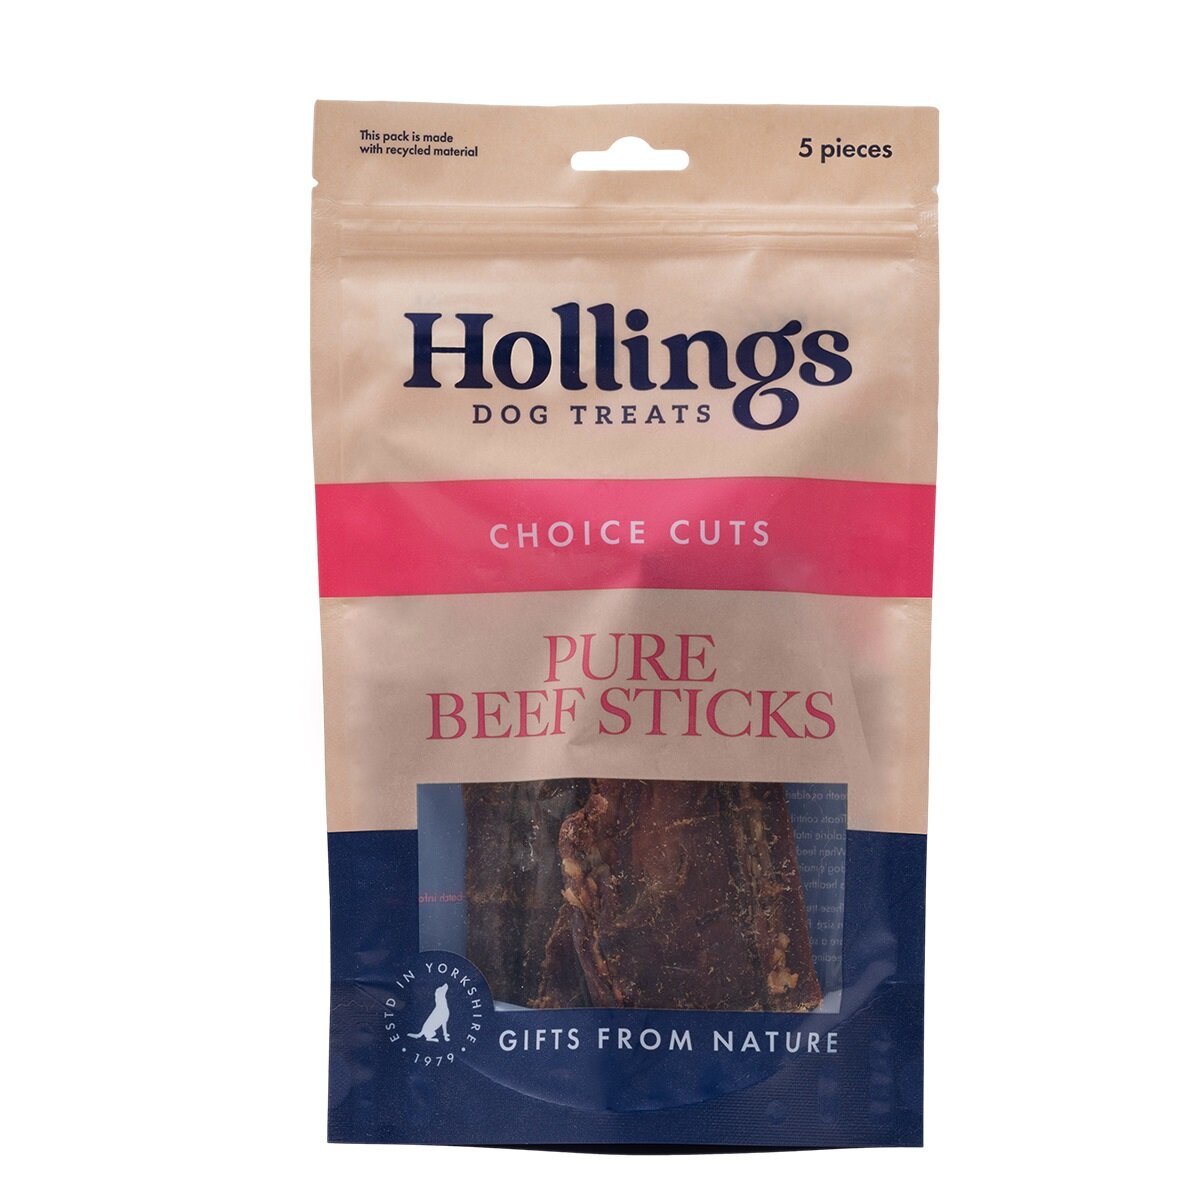 Hollings Pure Beef Sticks Display Box 15 x 5 pack